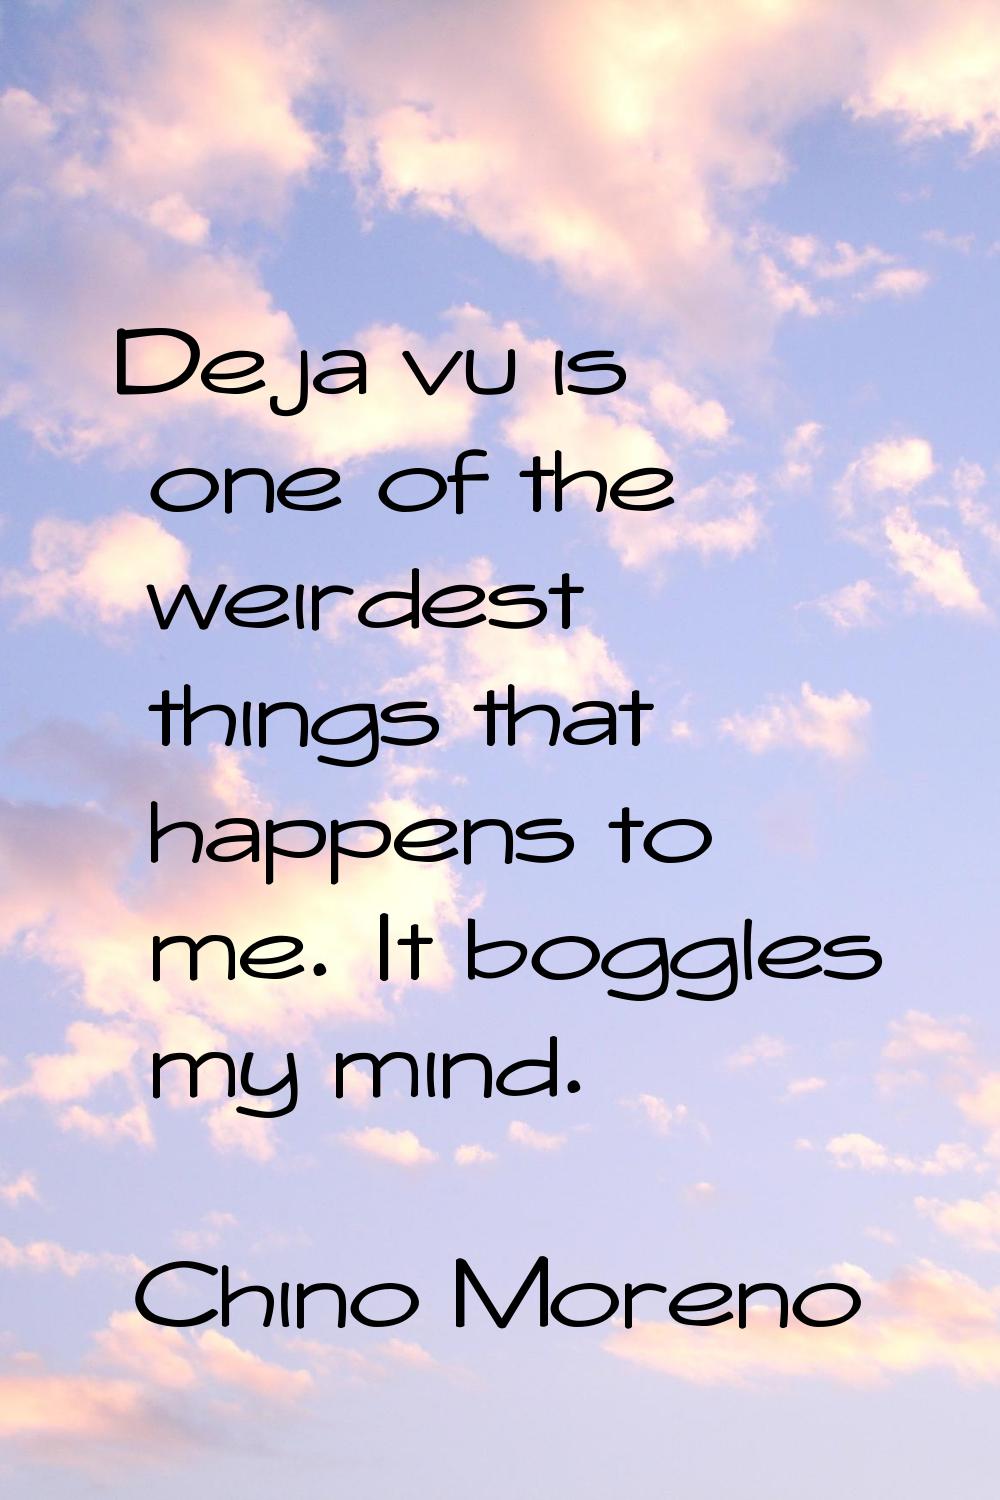 Deja vu is one of the weirdest things that happens to me. It boggles my mind.